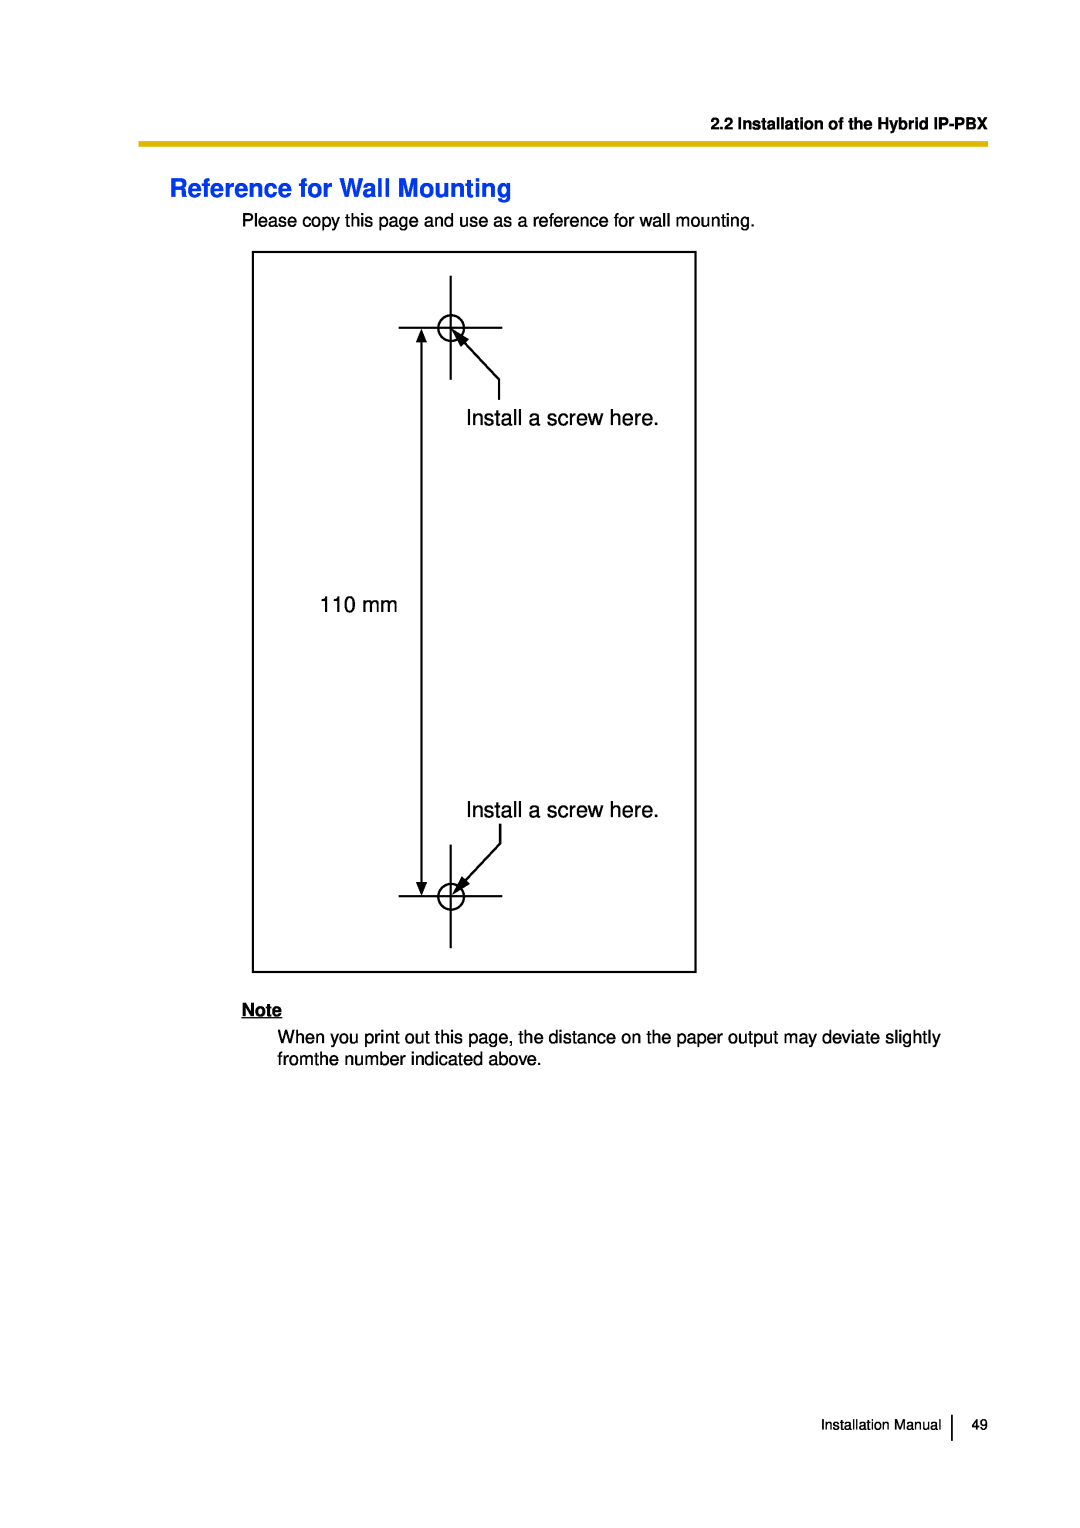 Panasonic KX-TDA30 installation manual Reference for Wall Mounting, Install a screw here 110 mm Install a screw here 